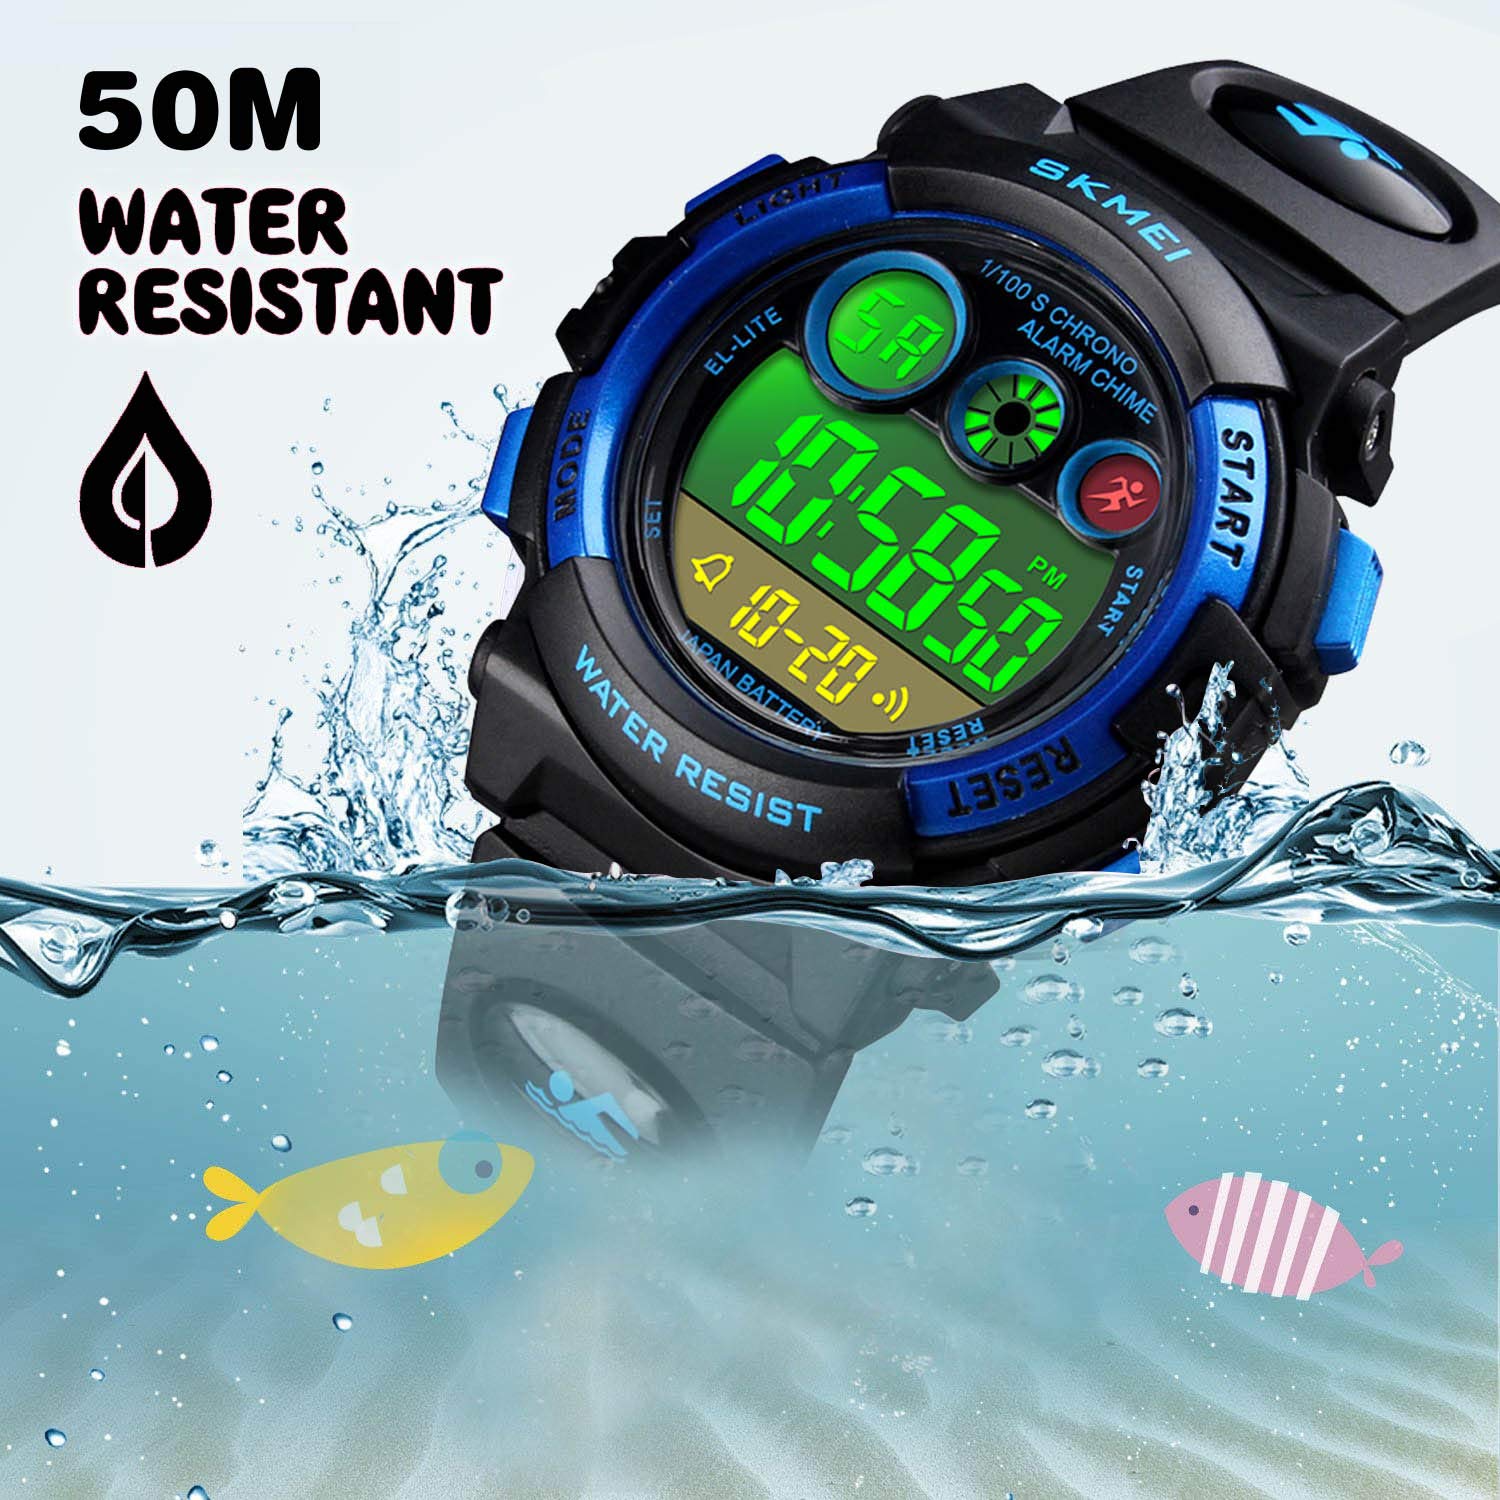 cofuo Kids Digital Sport Watch for Boys Girls, Kid Waterproof Electronic Multi Function Casual Outdoor Watches, 7 Colorful LED Luminous Alarm Stopwatch Wristwatch